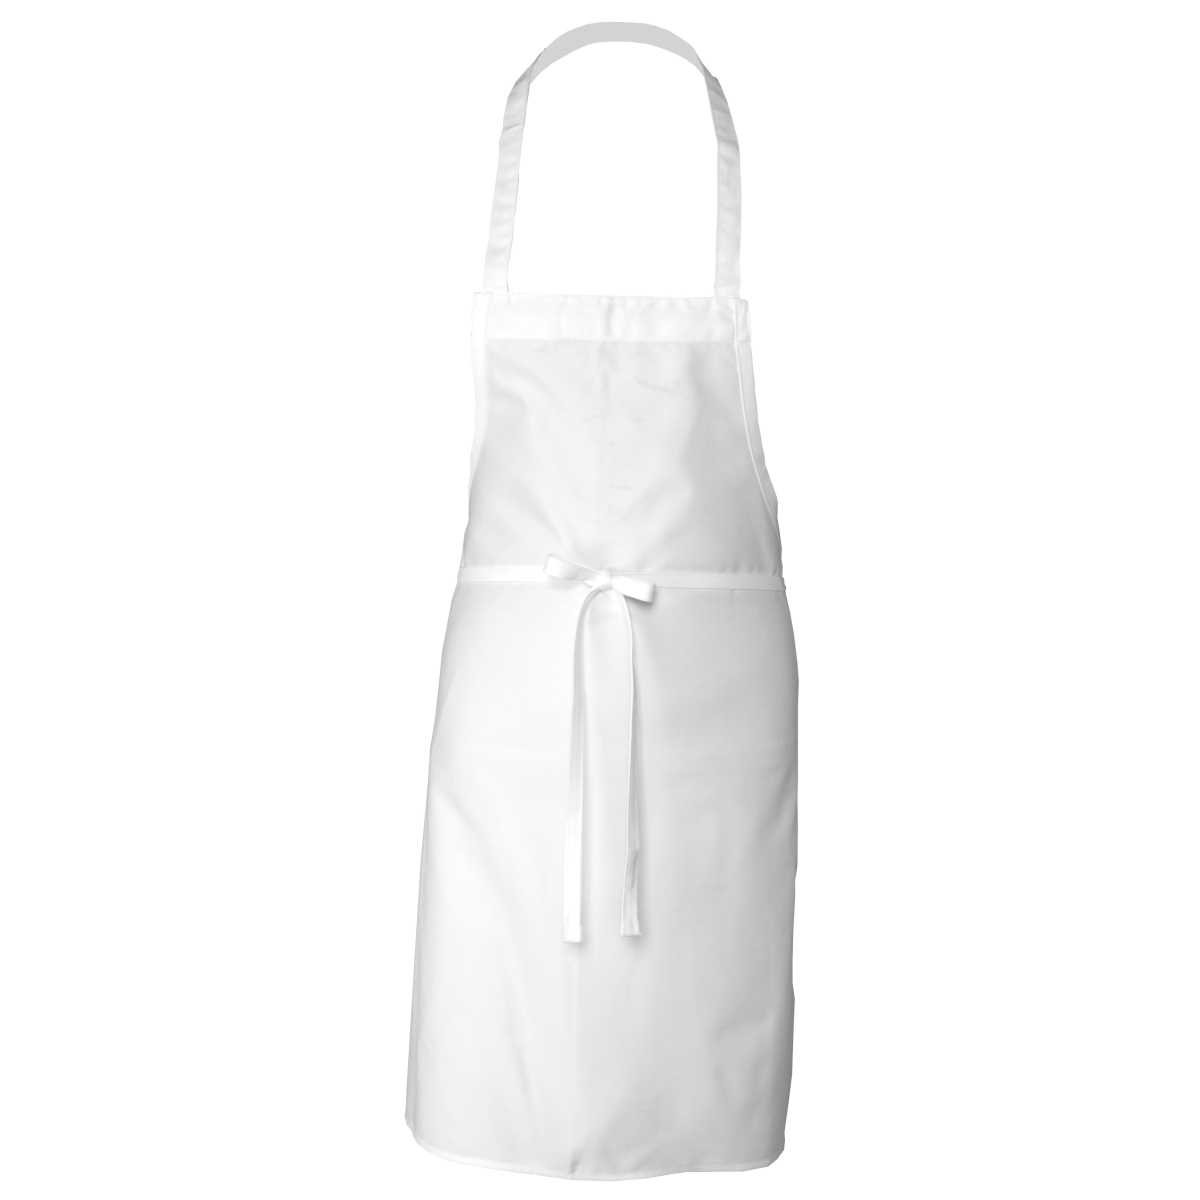 Chef Works Bib Apron No Pocket White - Chef's Complements